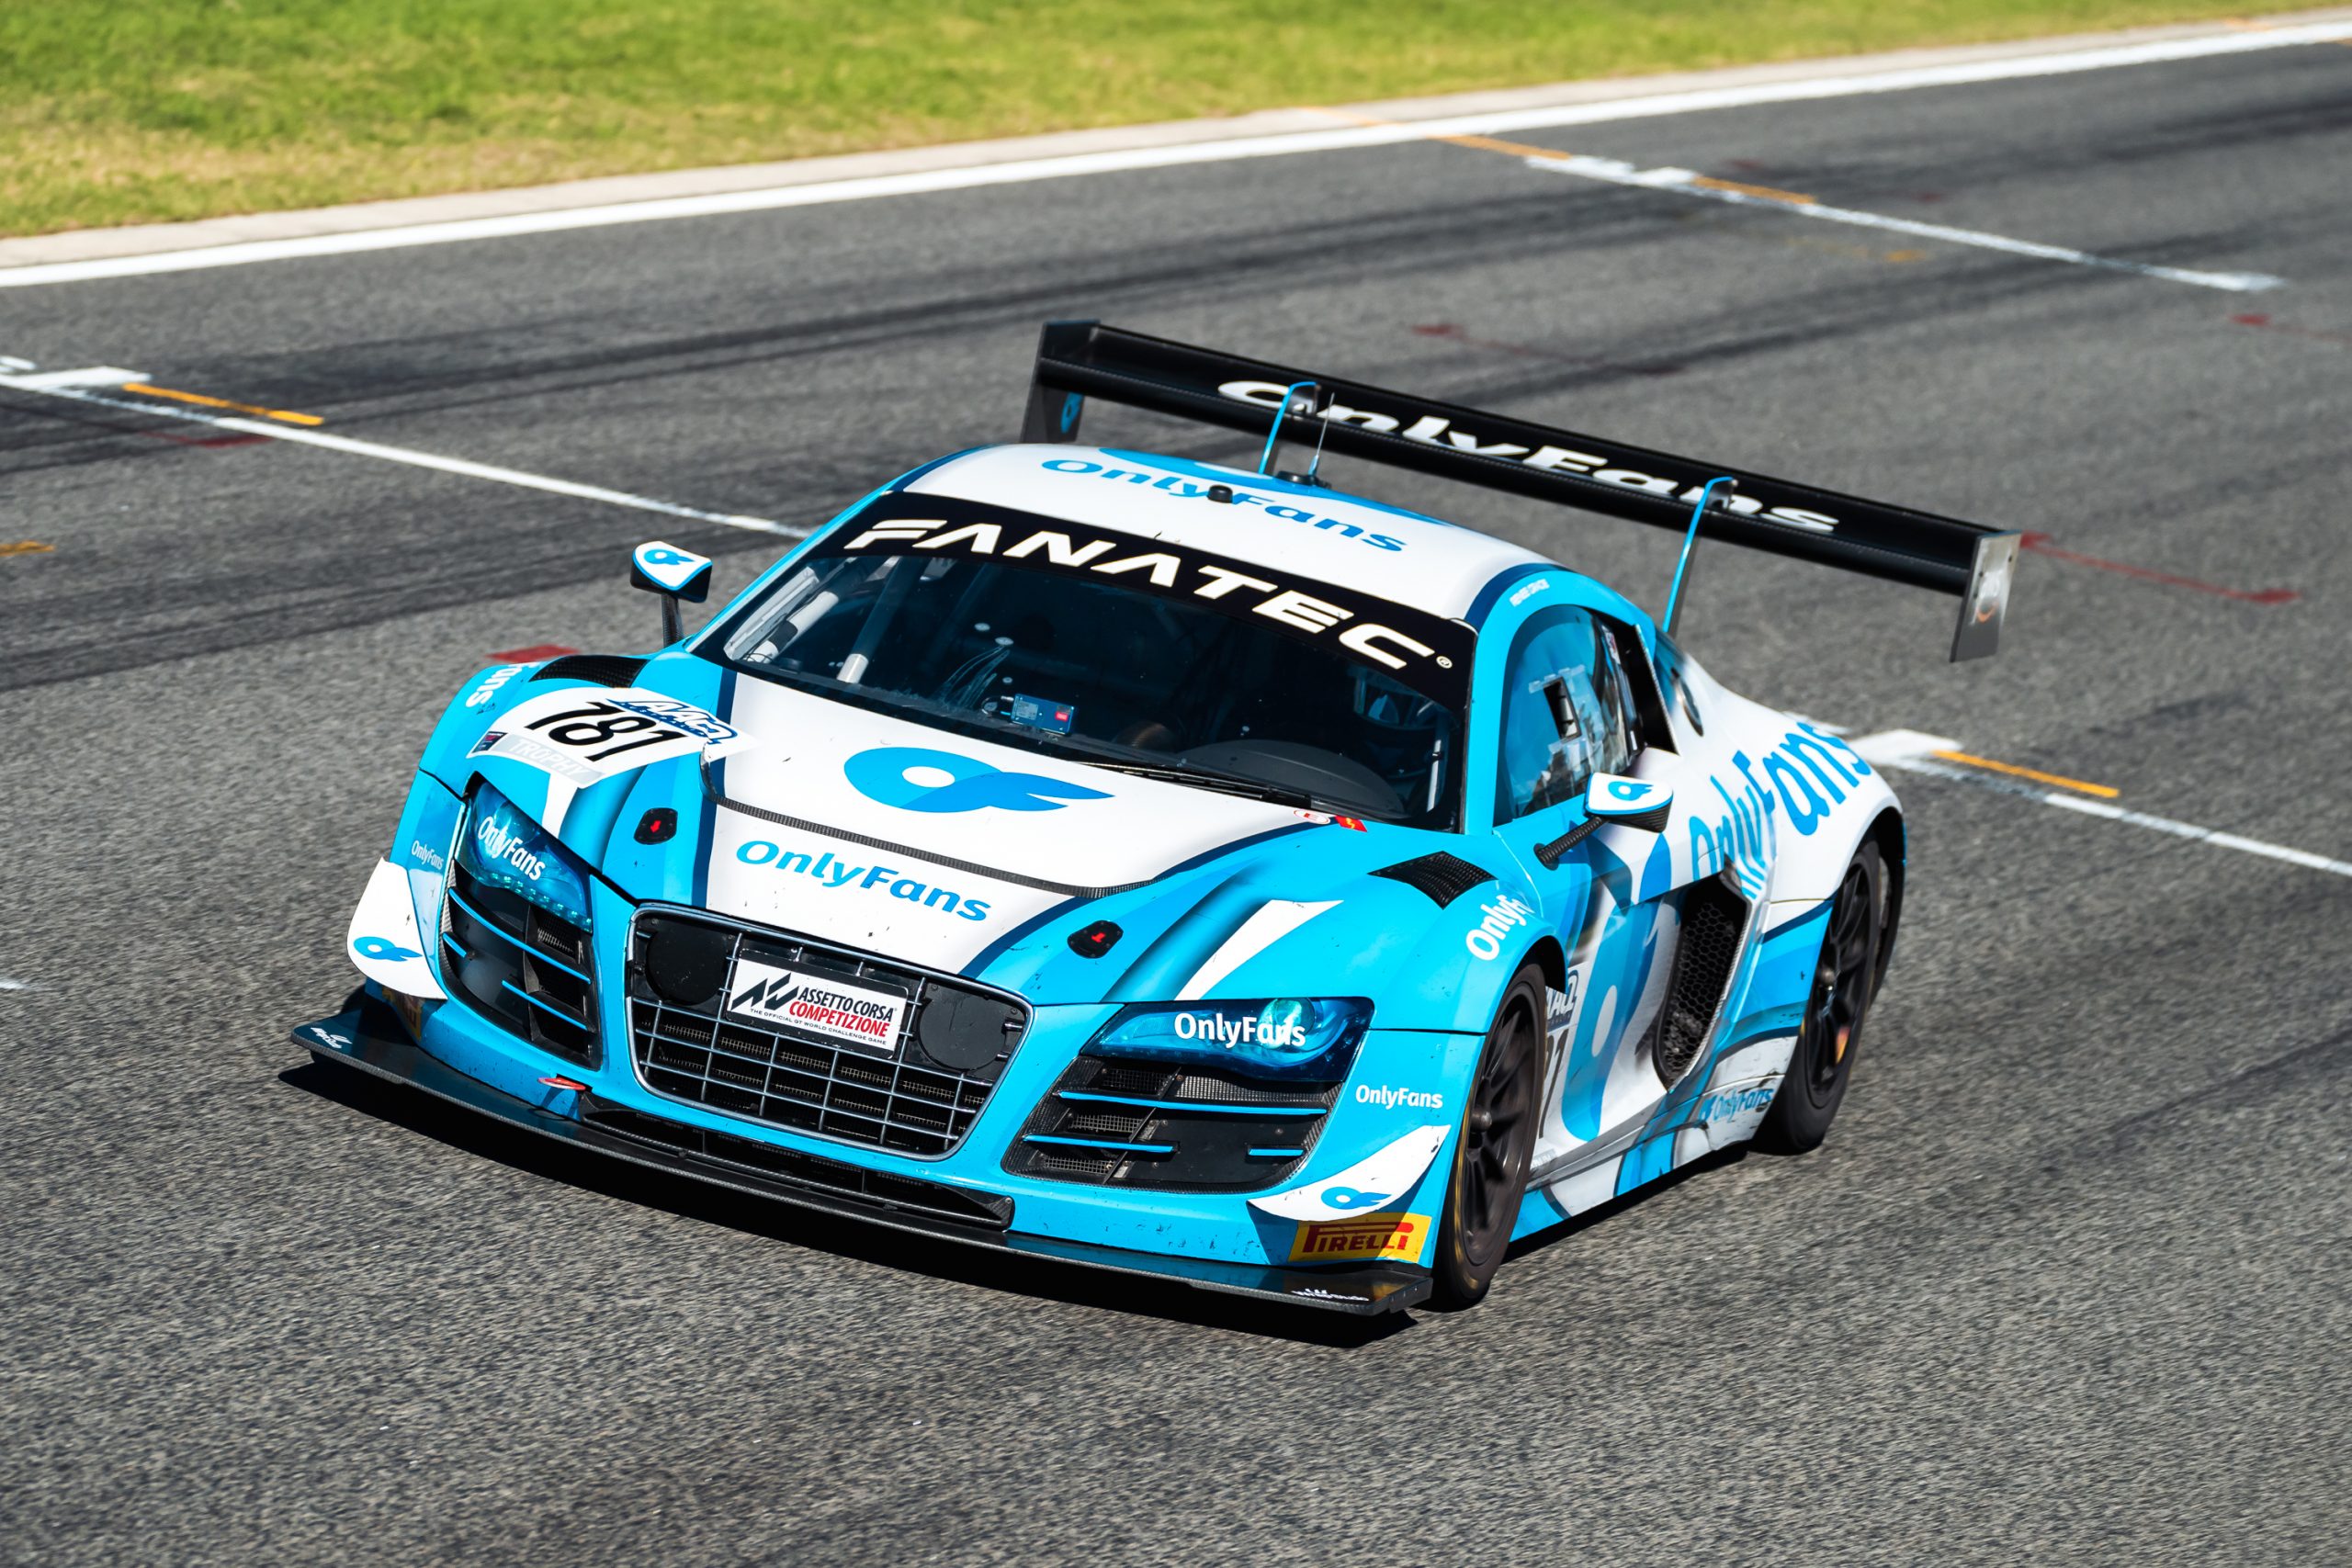 Gracie was the sole GT Trophy entry in Perth, finishing 12th and 15th overall in a slower GT3 car.